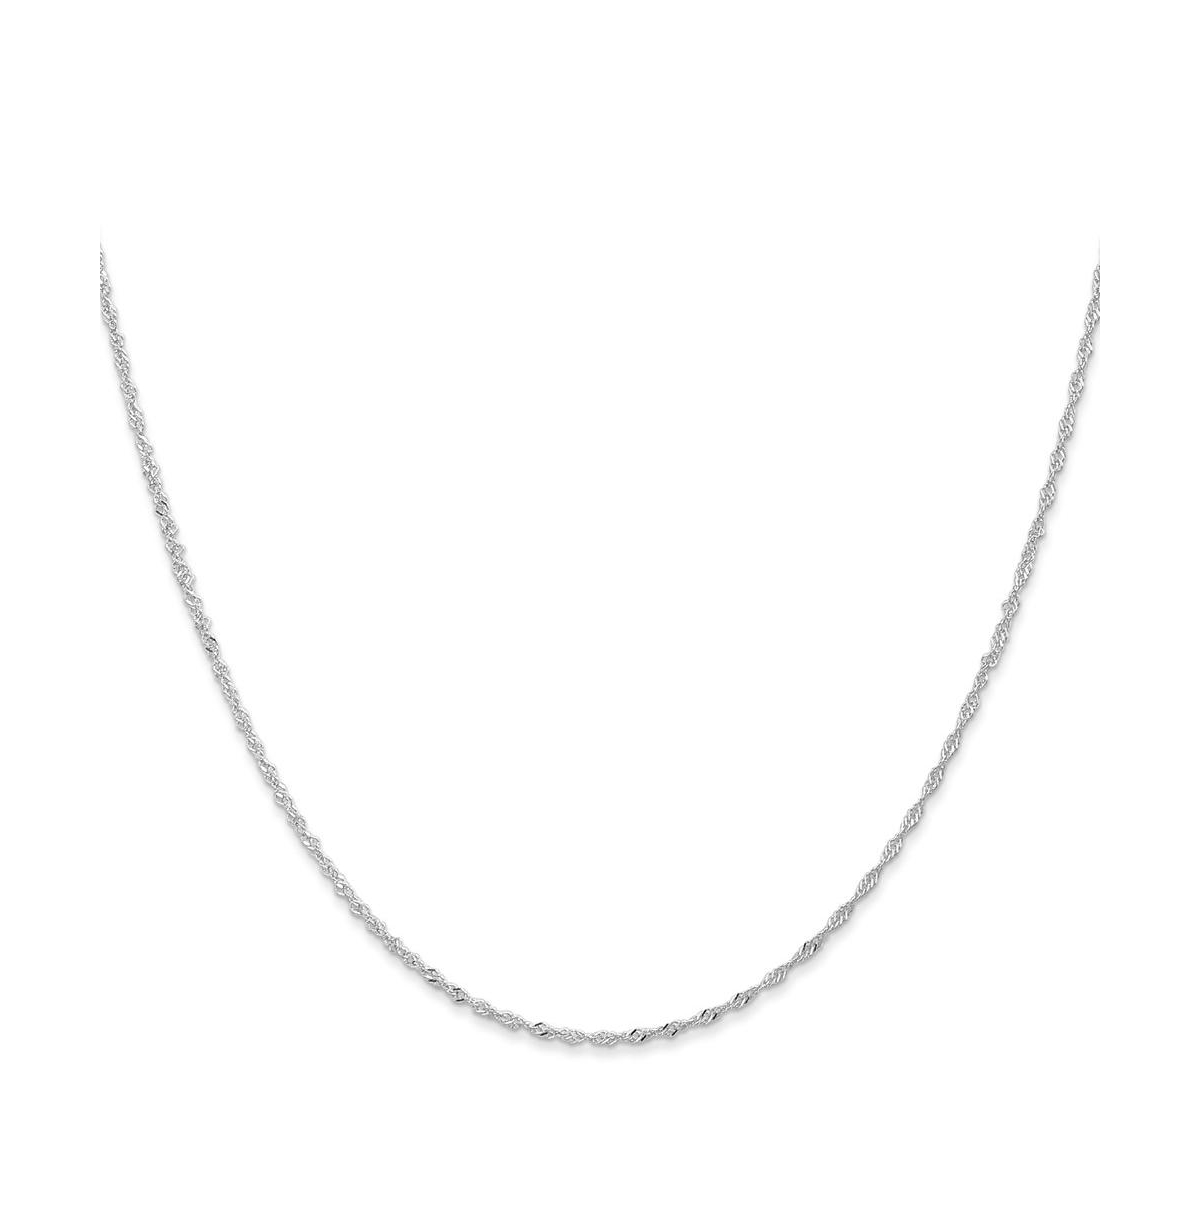 18K White Gold 18" Singapore Chain Necklace - Silver